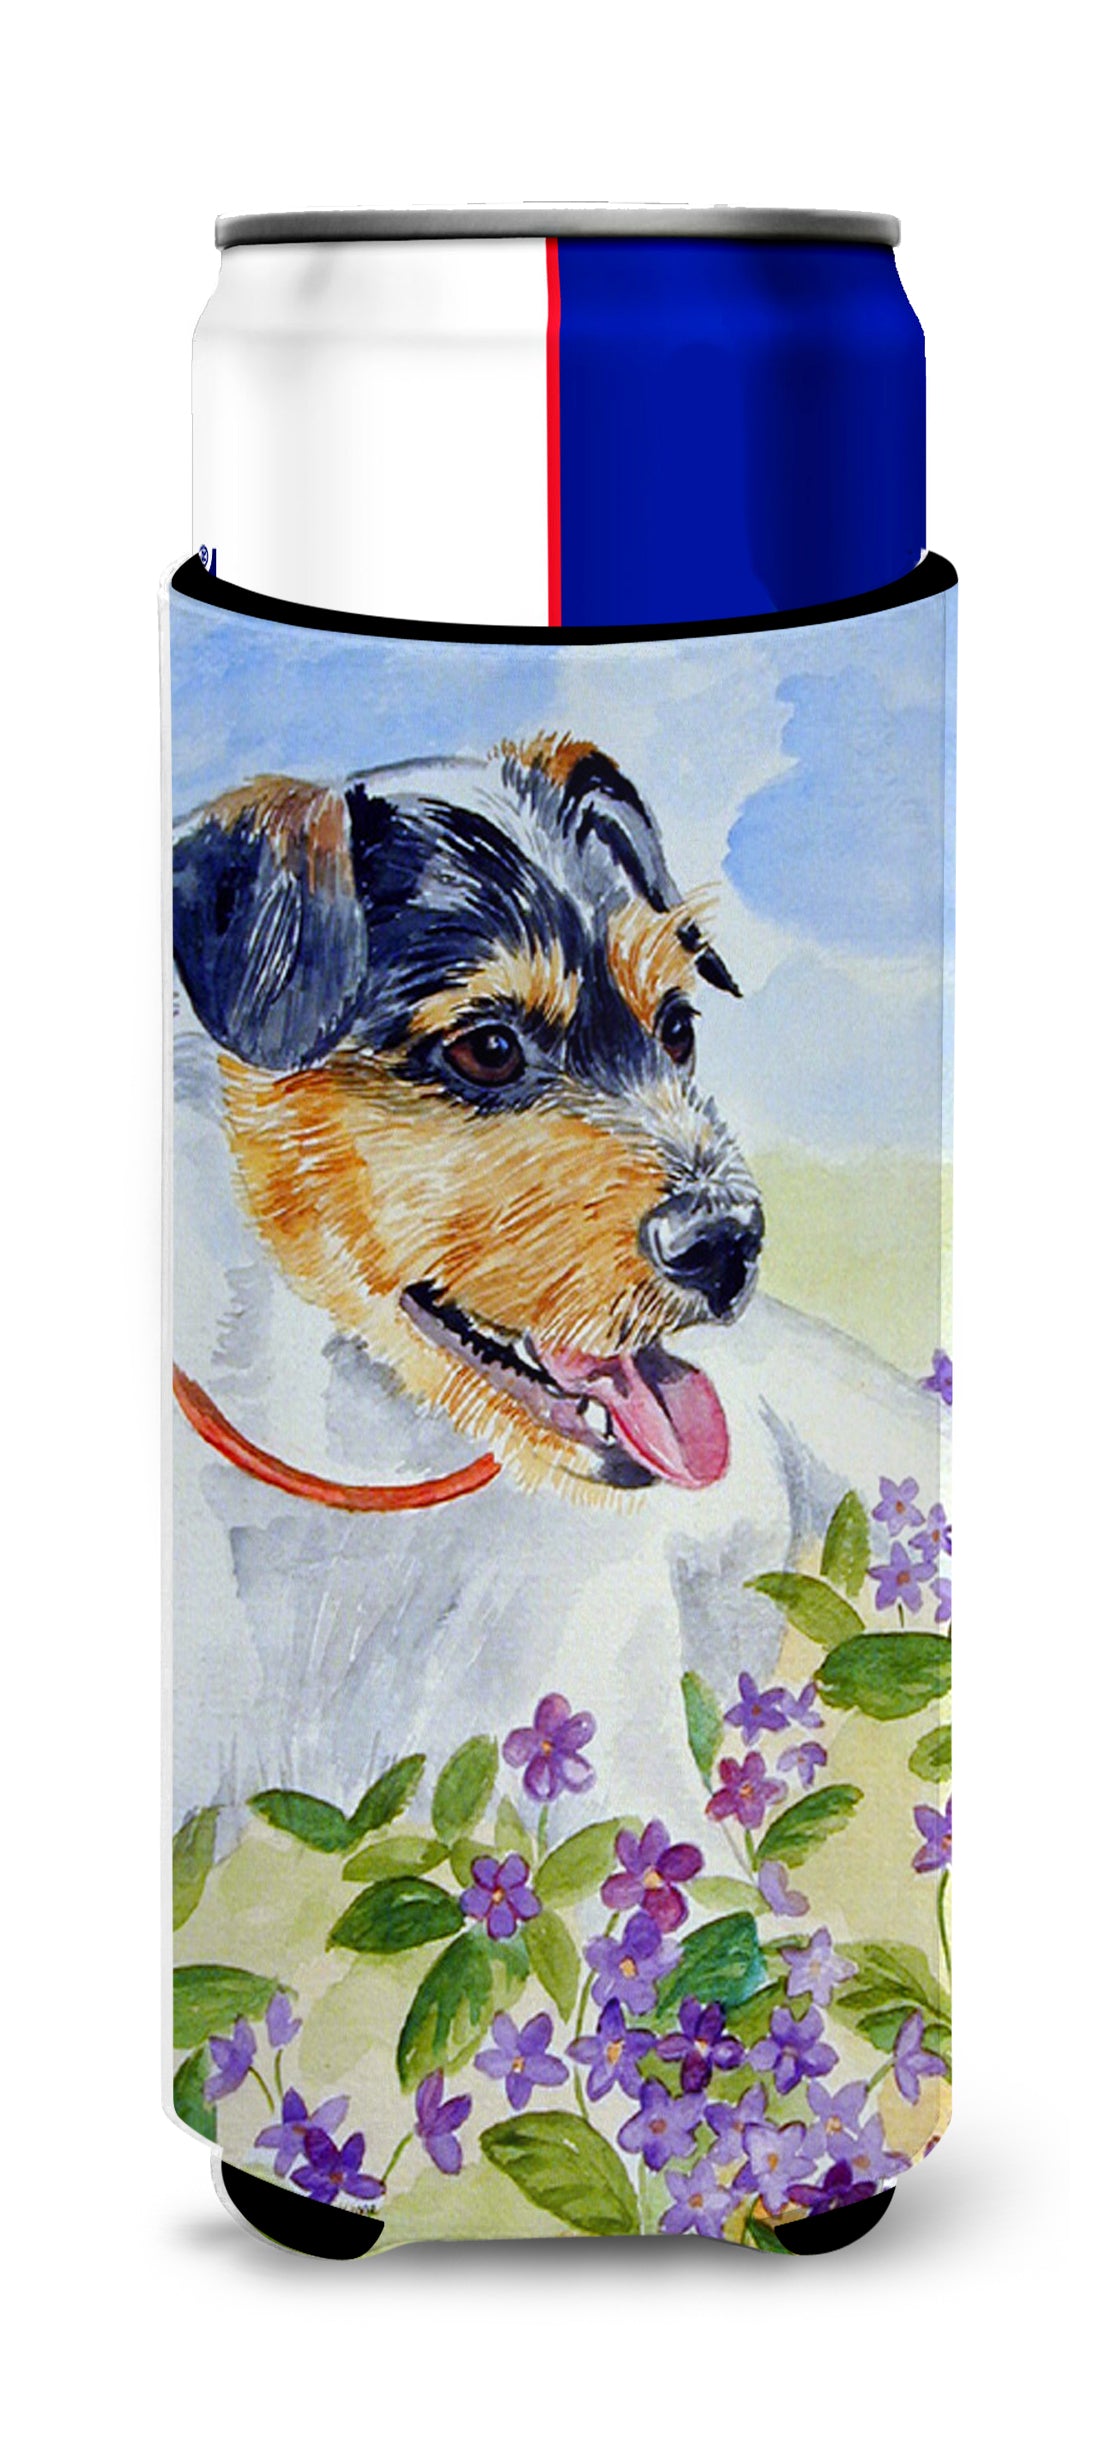 Jack Russell Terrier Ultra Beverage Insulators for slim cans 7106MUK.